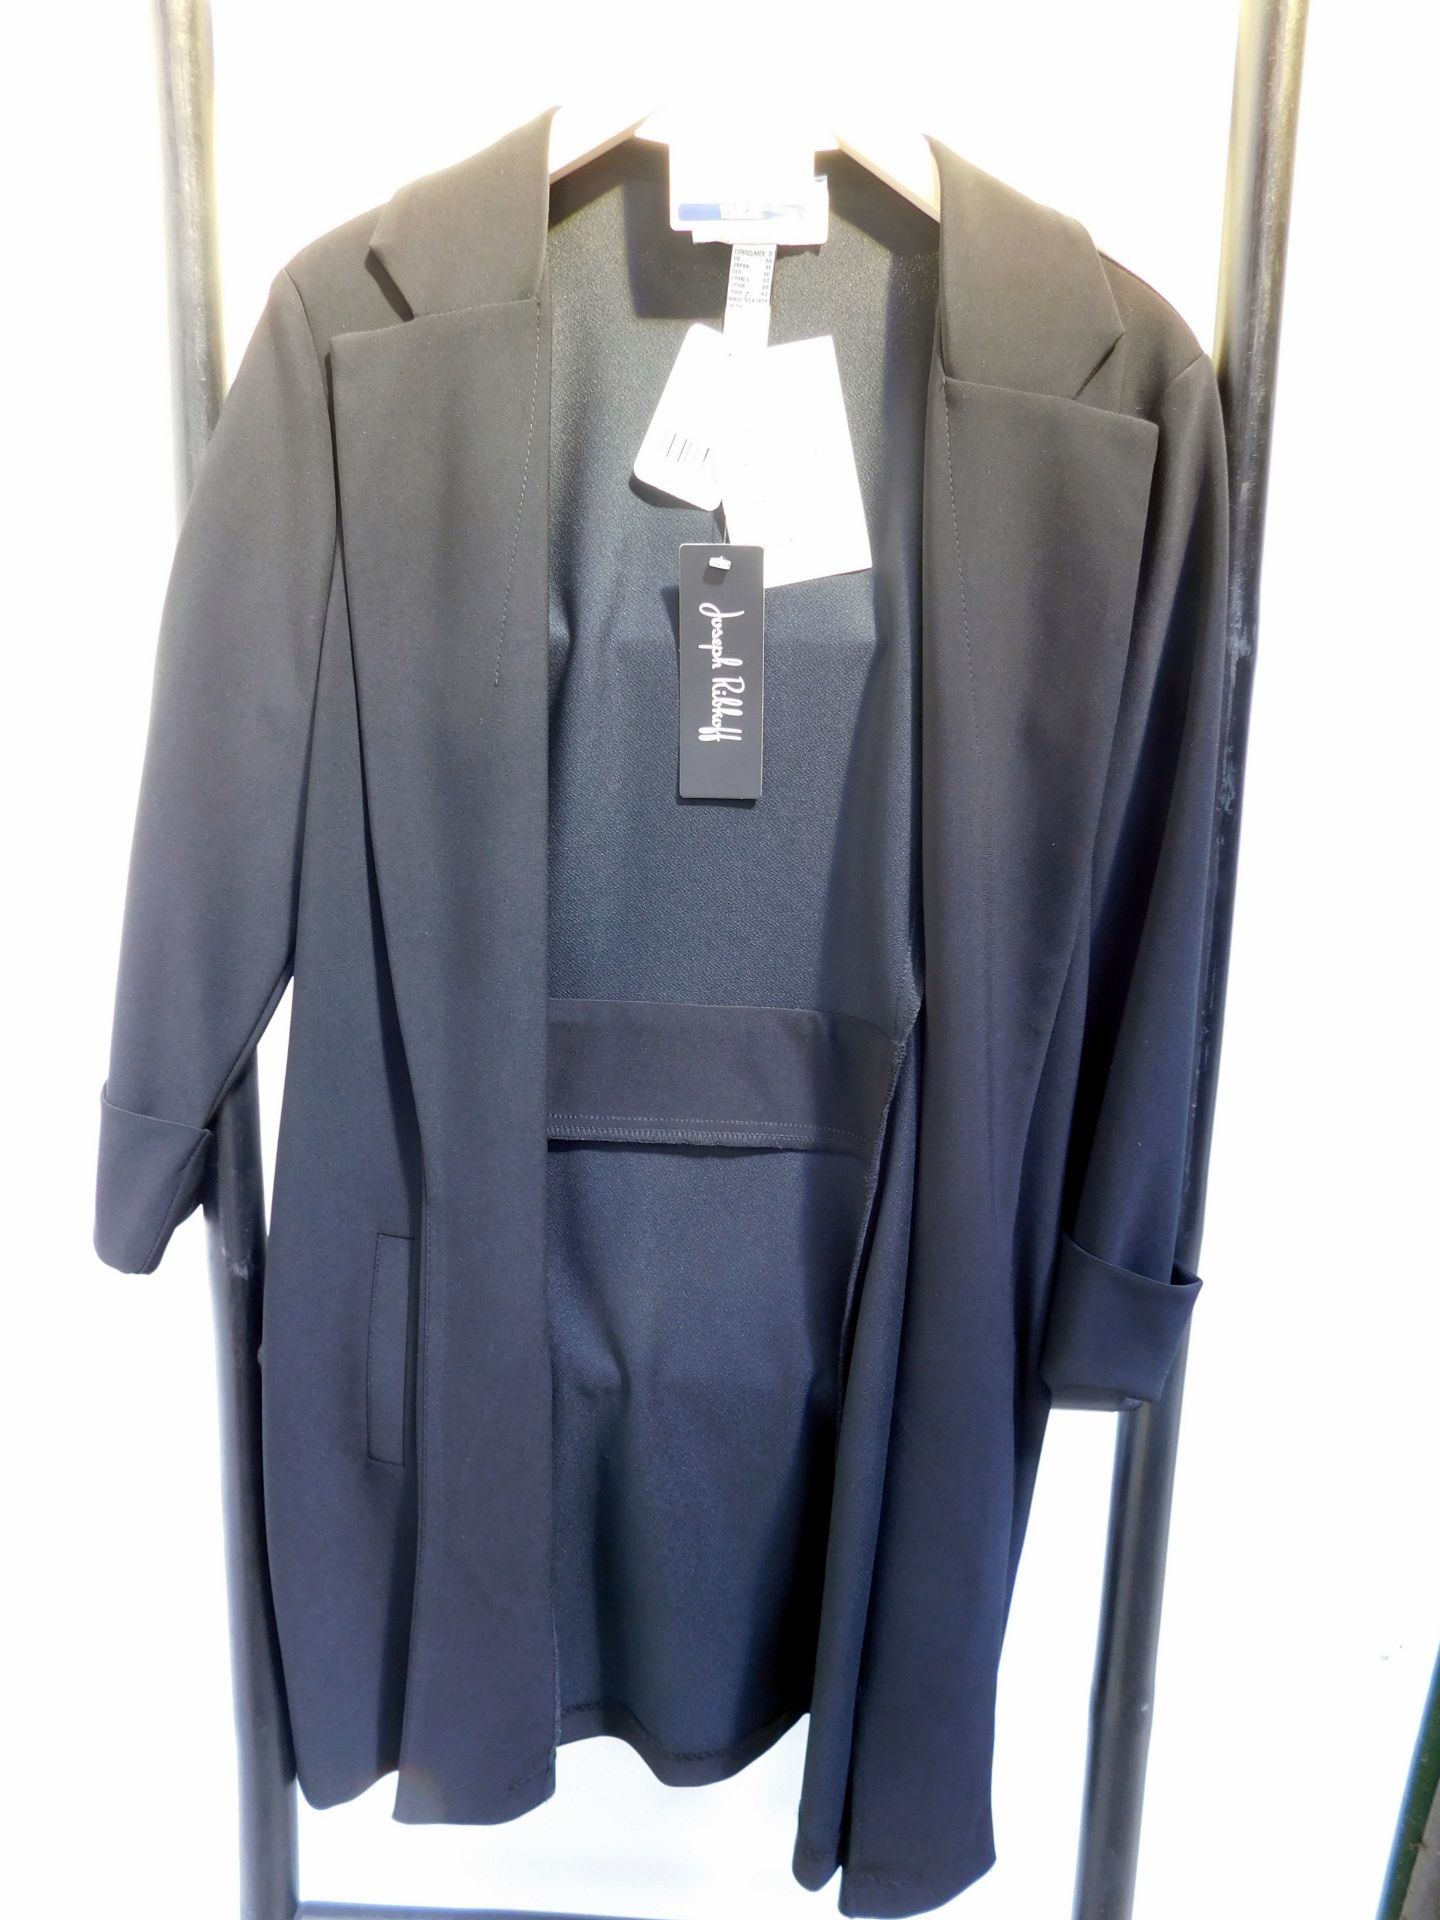 Joseph Ribkoff Coat, Style: 194192, Shade: Black, Size 10 (Located Brentwood, See General Notes